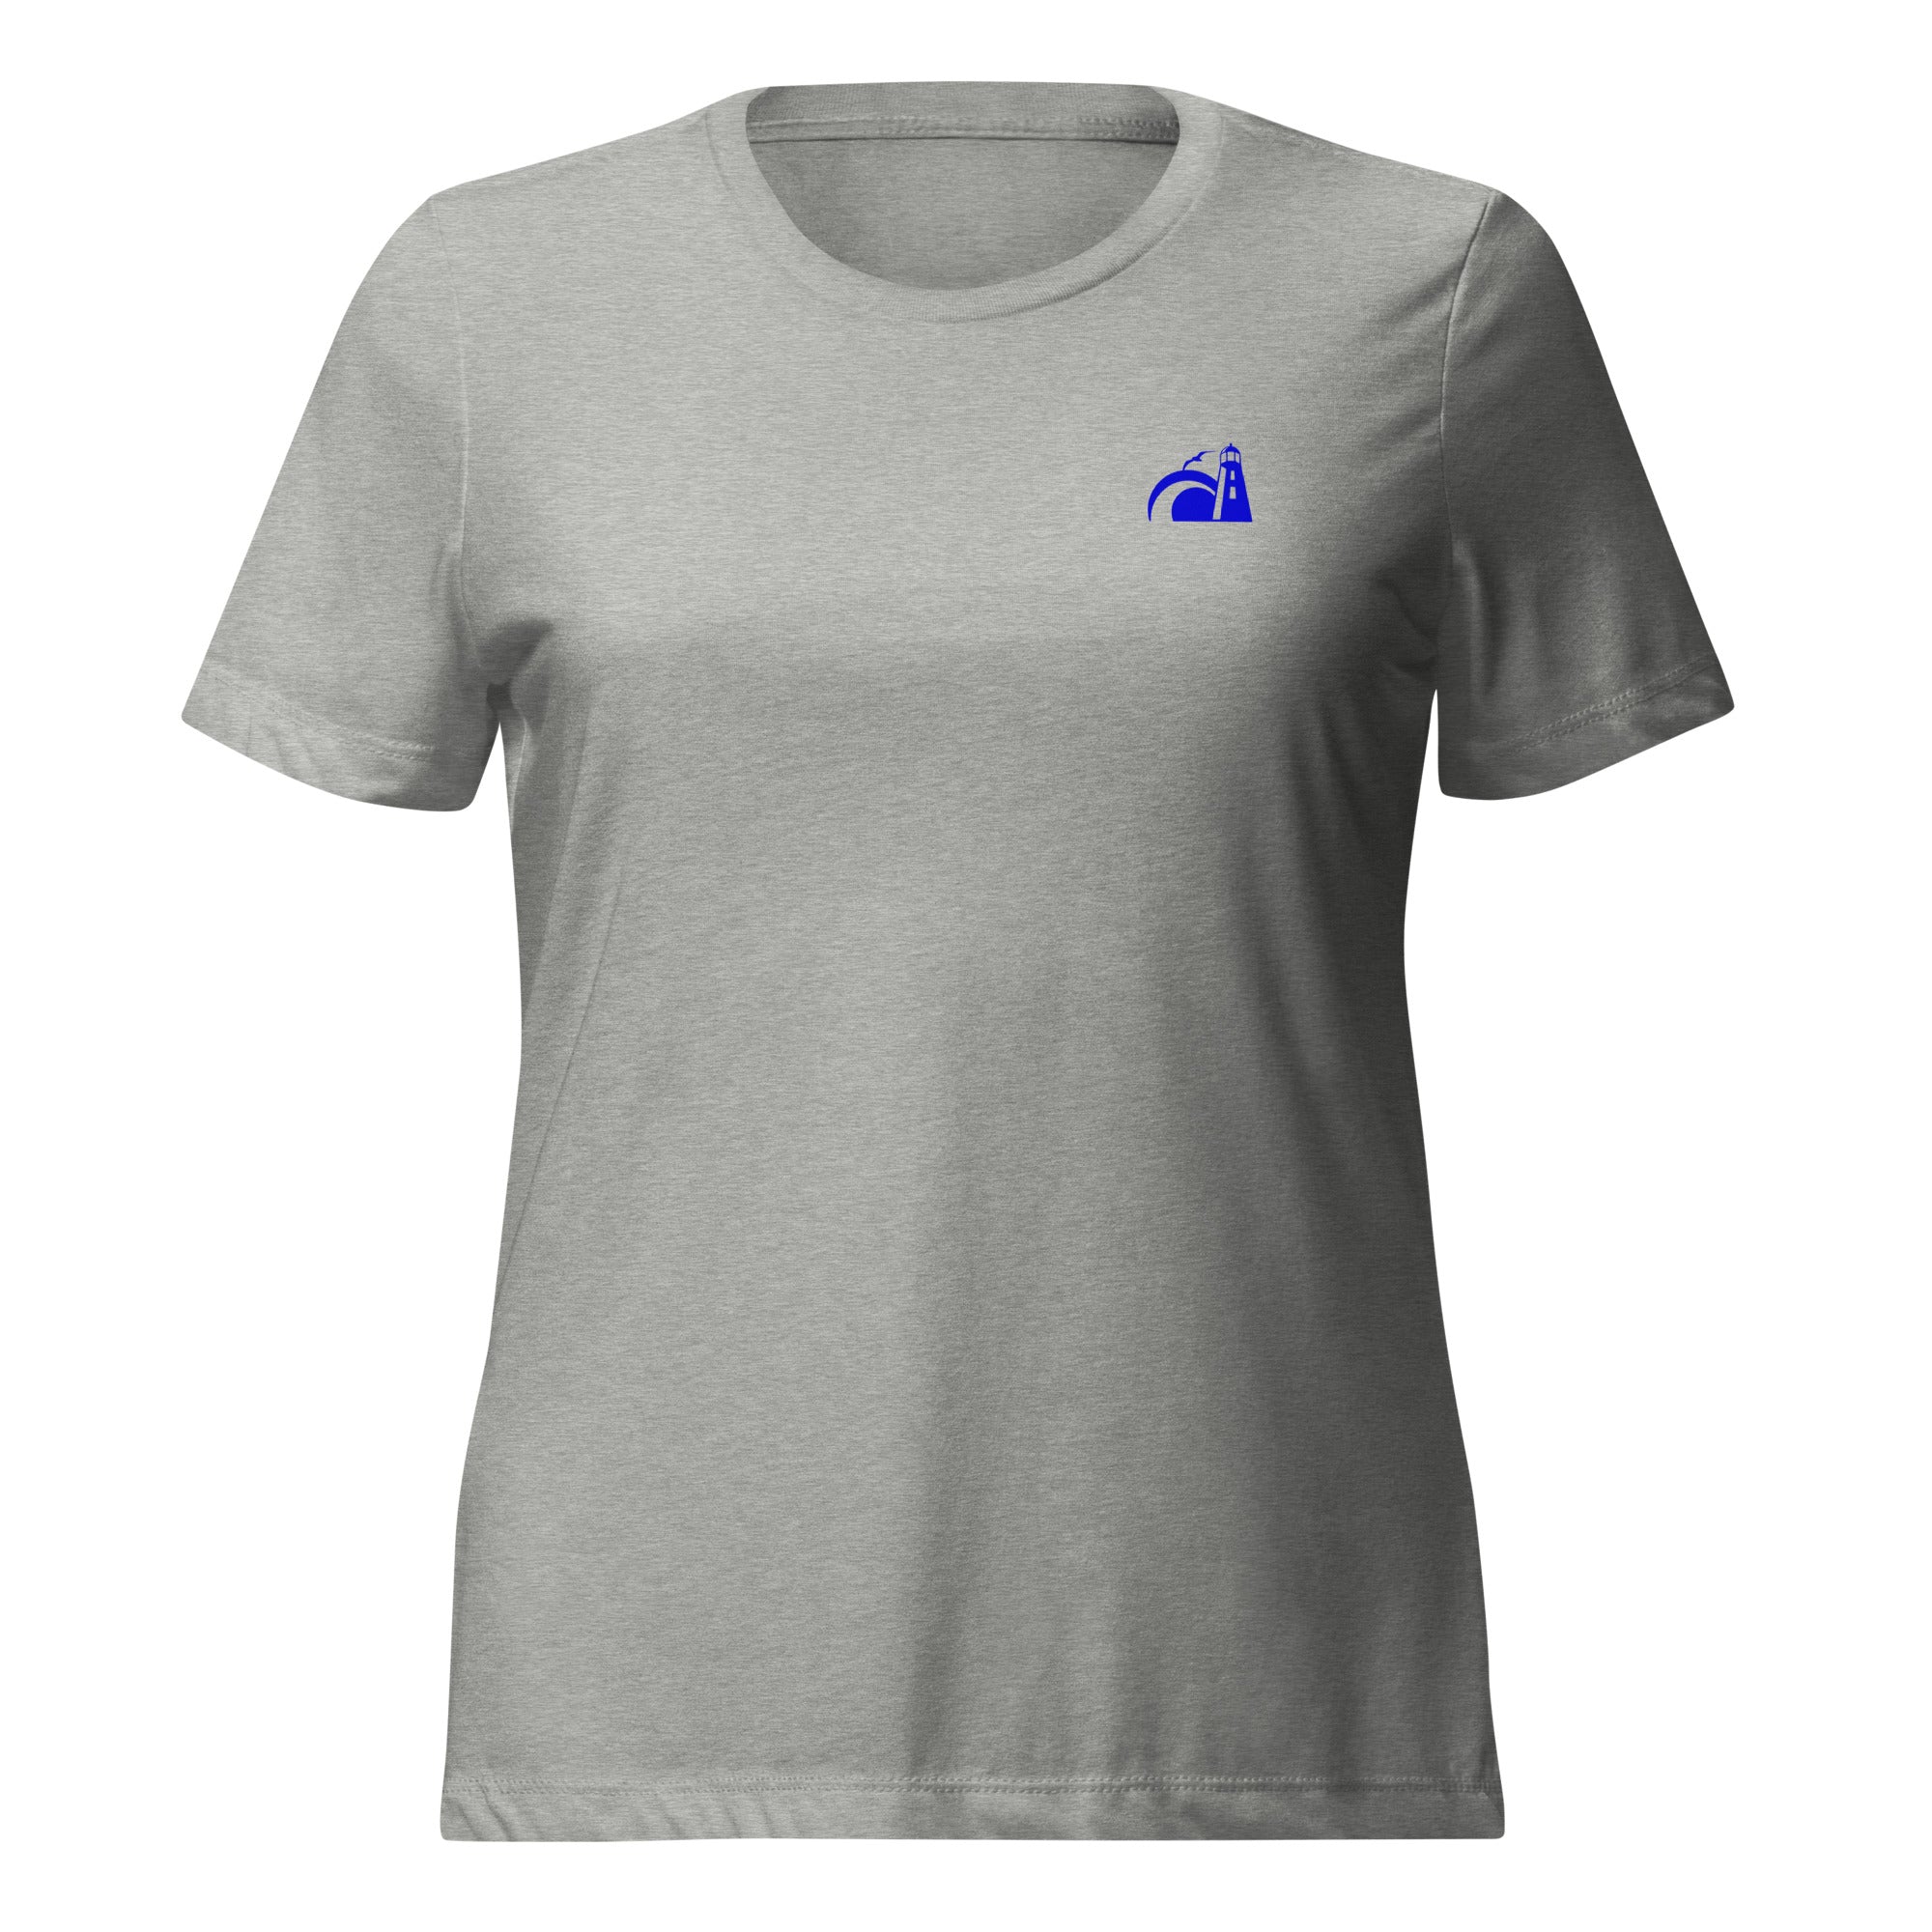 Women’s PB & Jelly Relaxed Tee